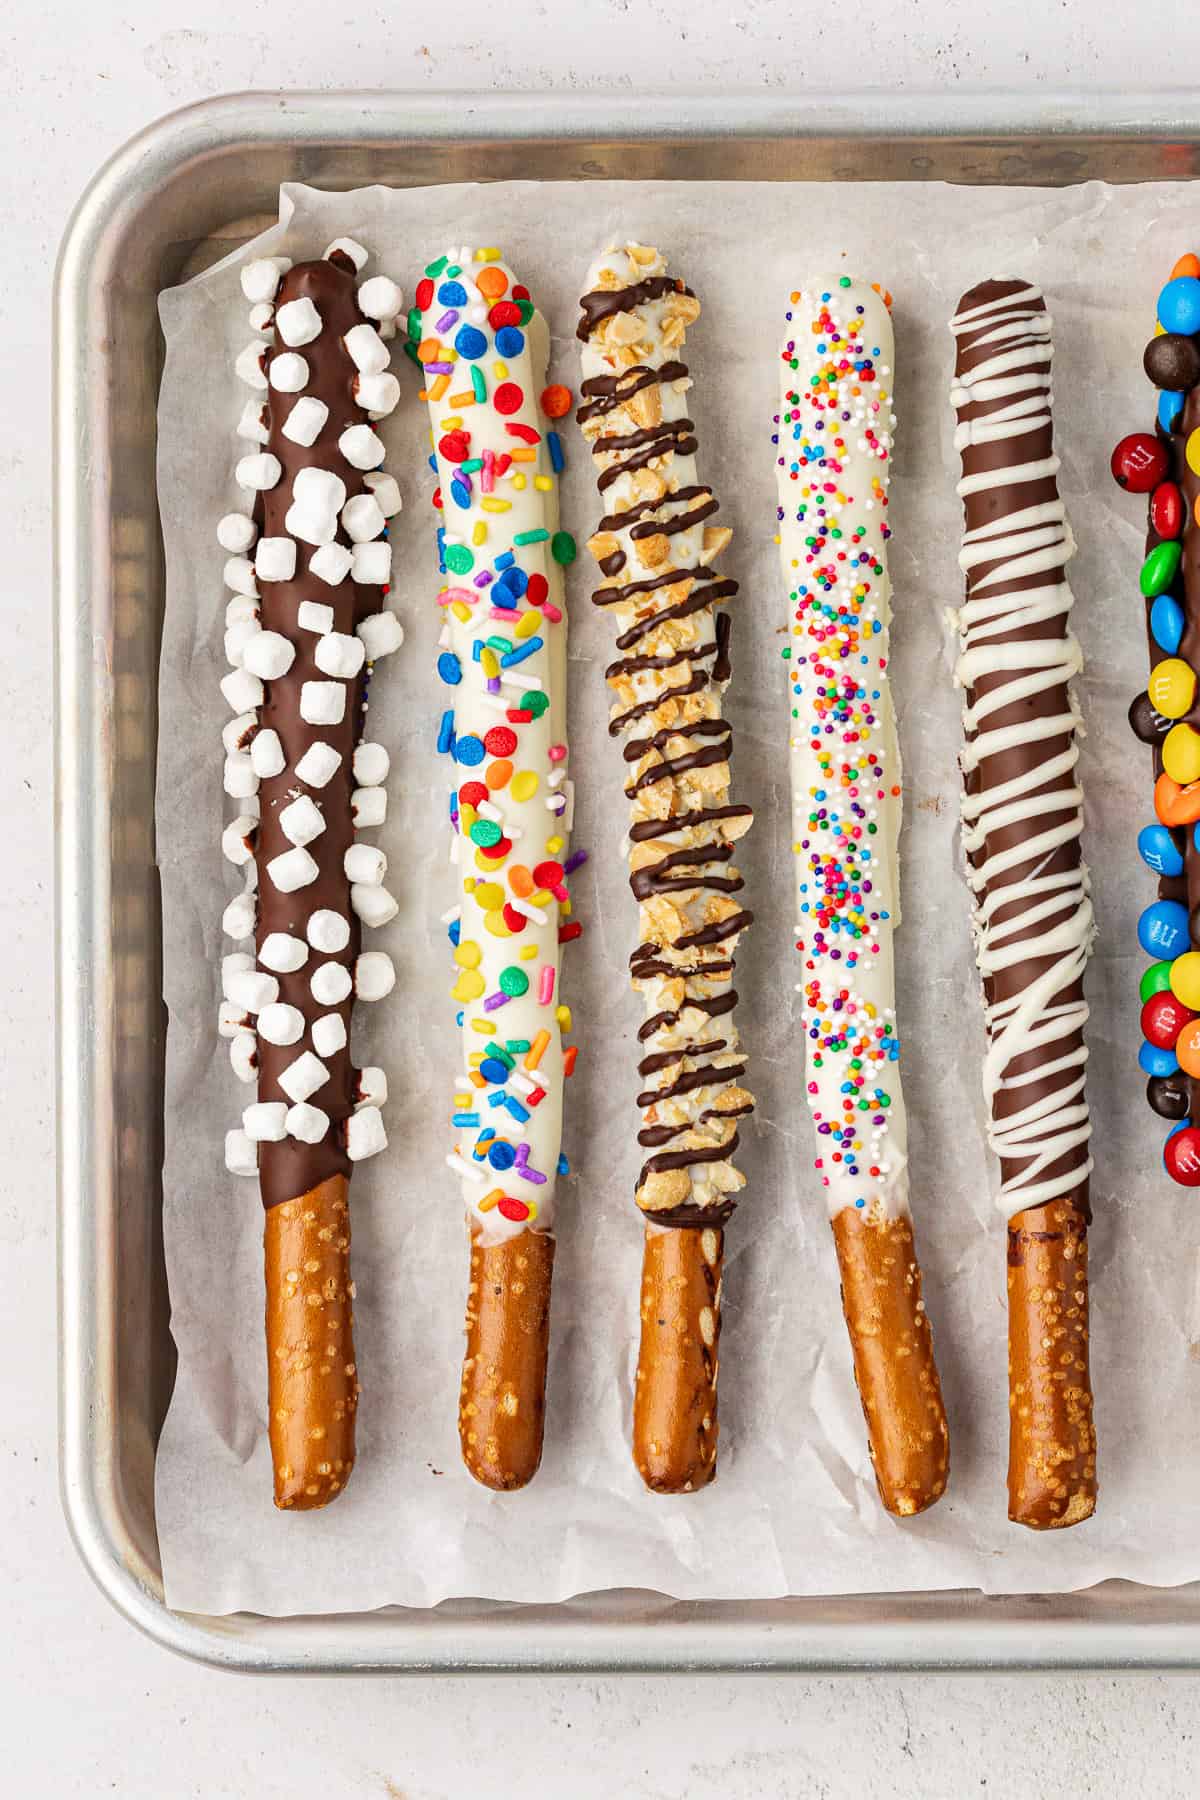 a row of chocolate covered pretzel rods on a baking sheet with different toppings: first chocolate with mini marshmallows, next white chocolate with rainbow sprinkles, next white chocolate with crushed nuts and chocolate drizzle, next white chocolate with mini rainbow sprinkles, next chocolate drizzled with white chocolate, and then chocolate with m&ms